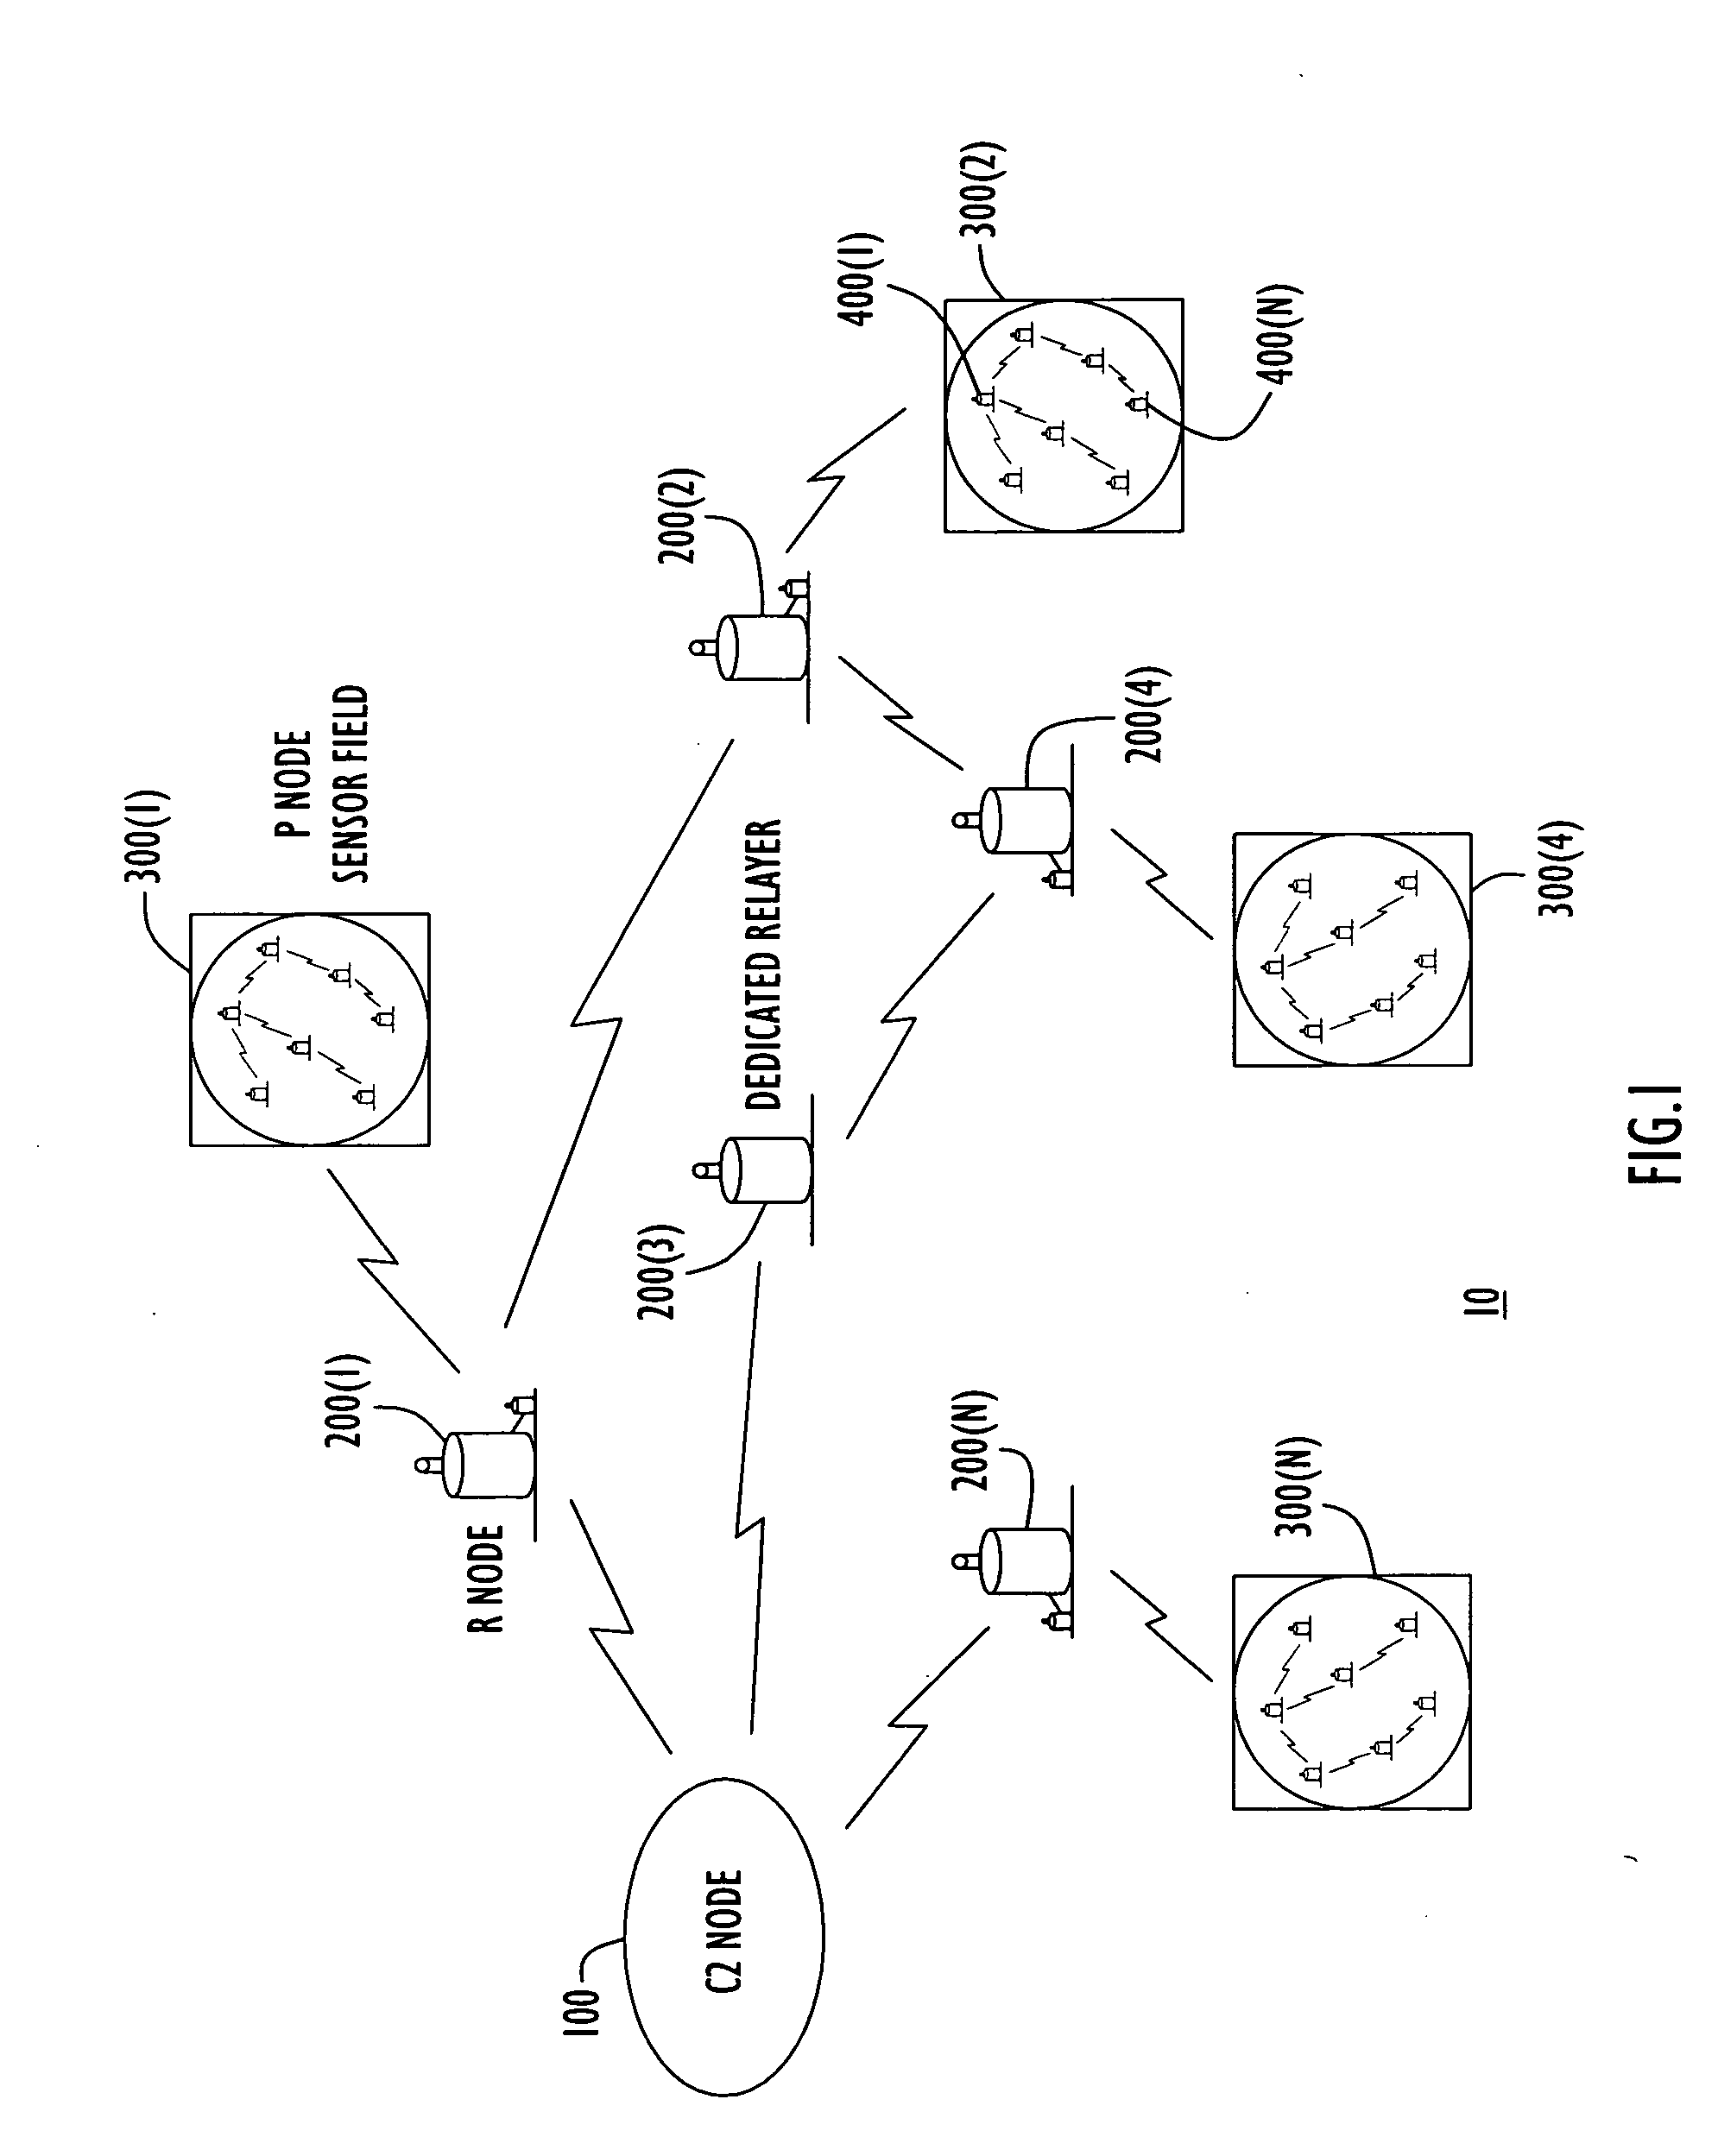 Energy-efficient medium access control protocol and system for sensor networks